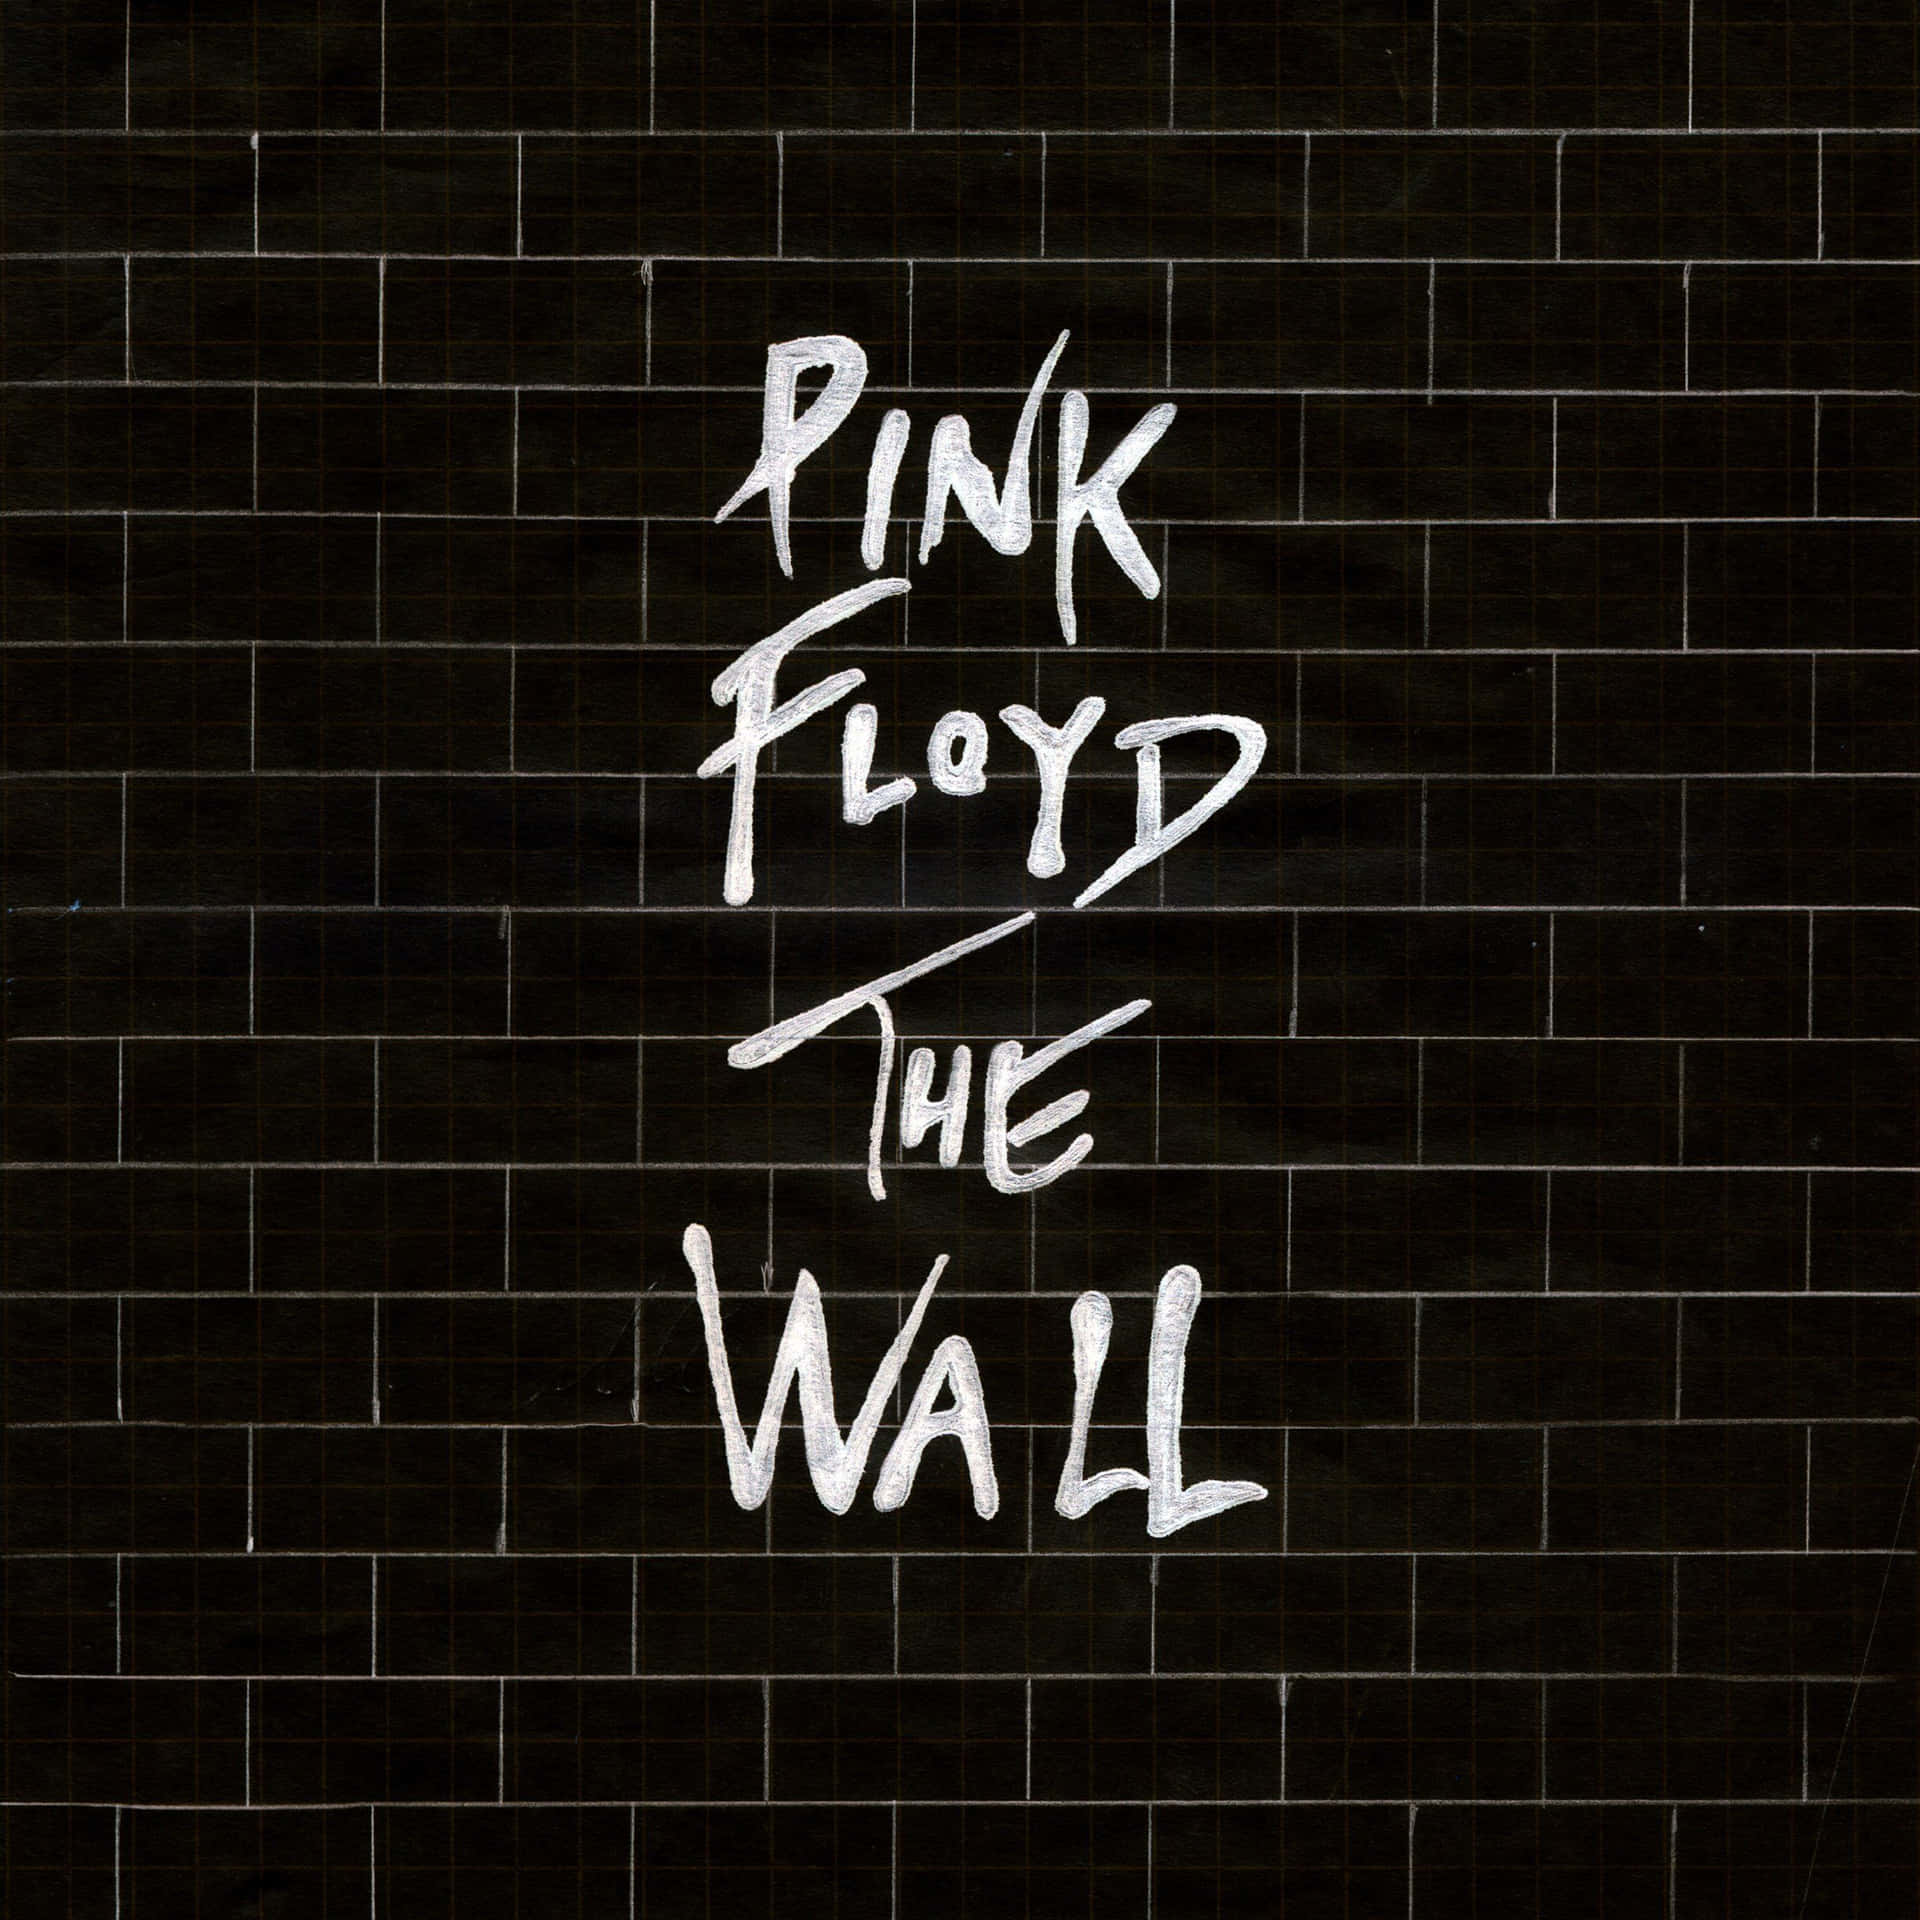 Pink Floyd - The Wall Album Cover Wallpaper